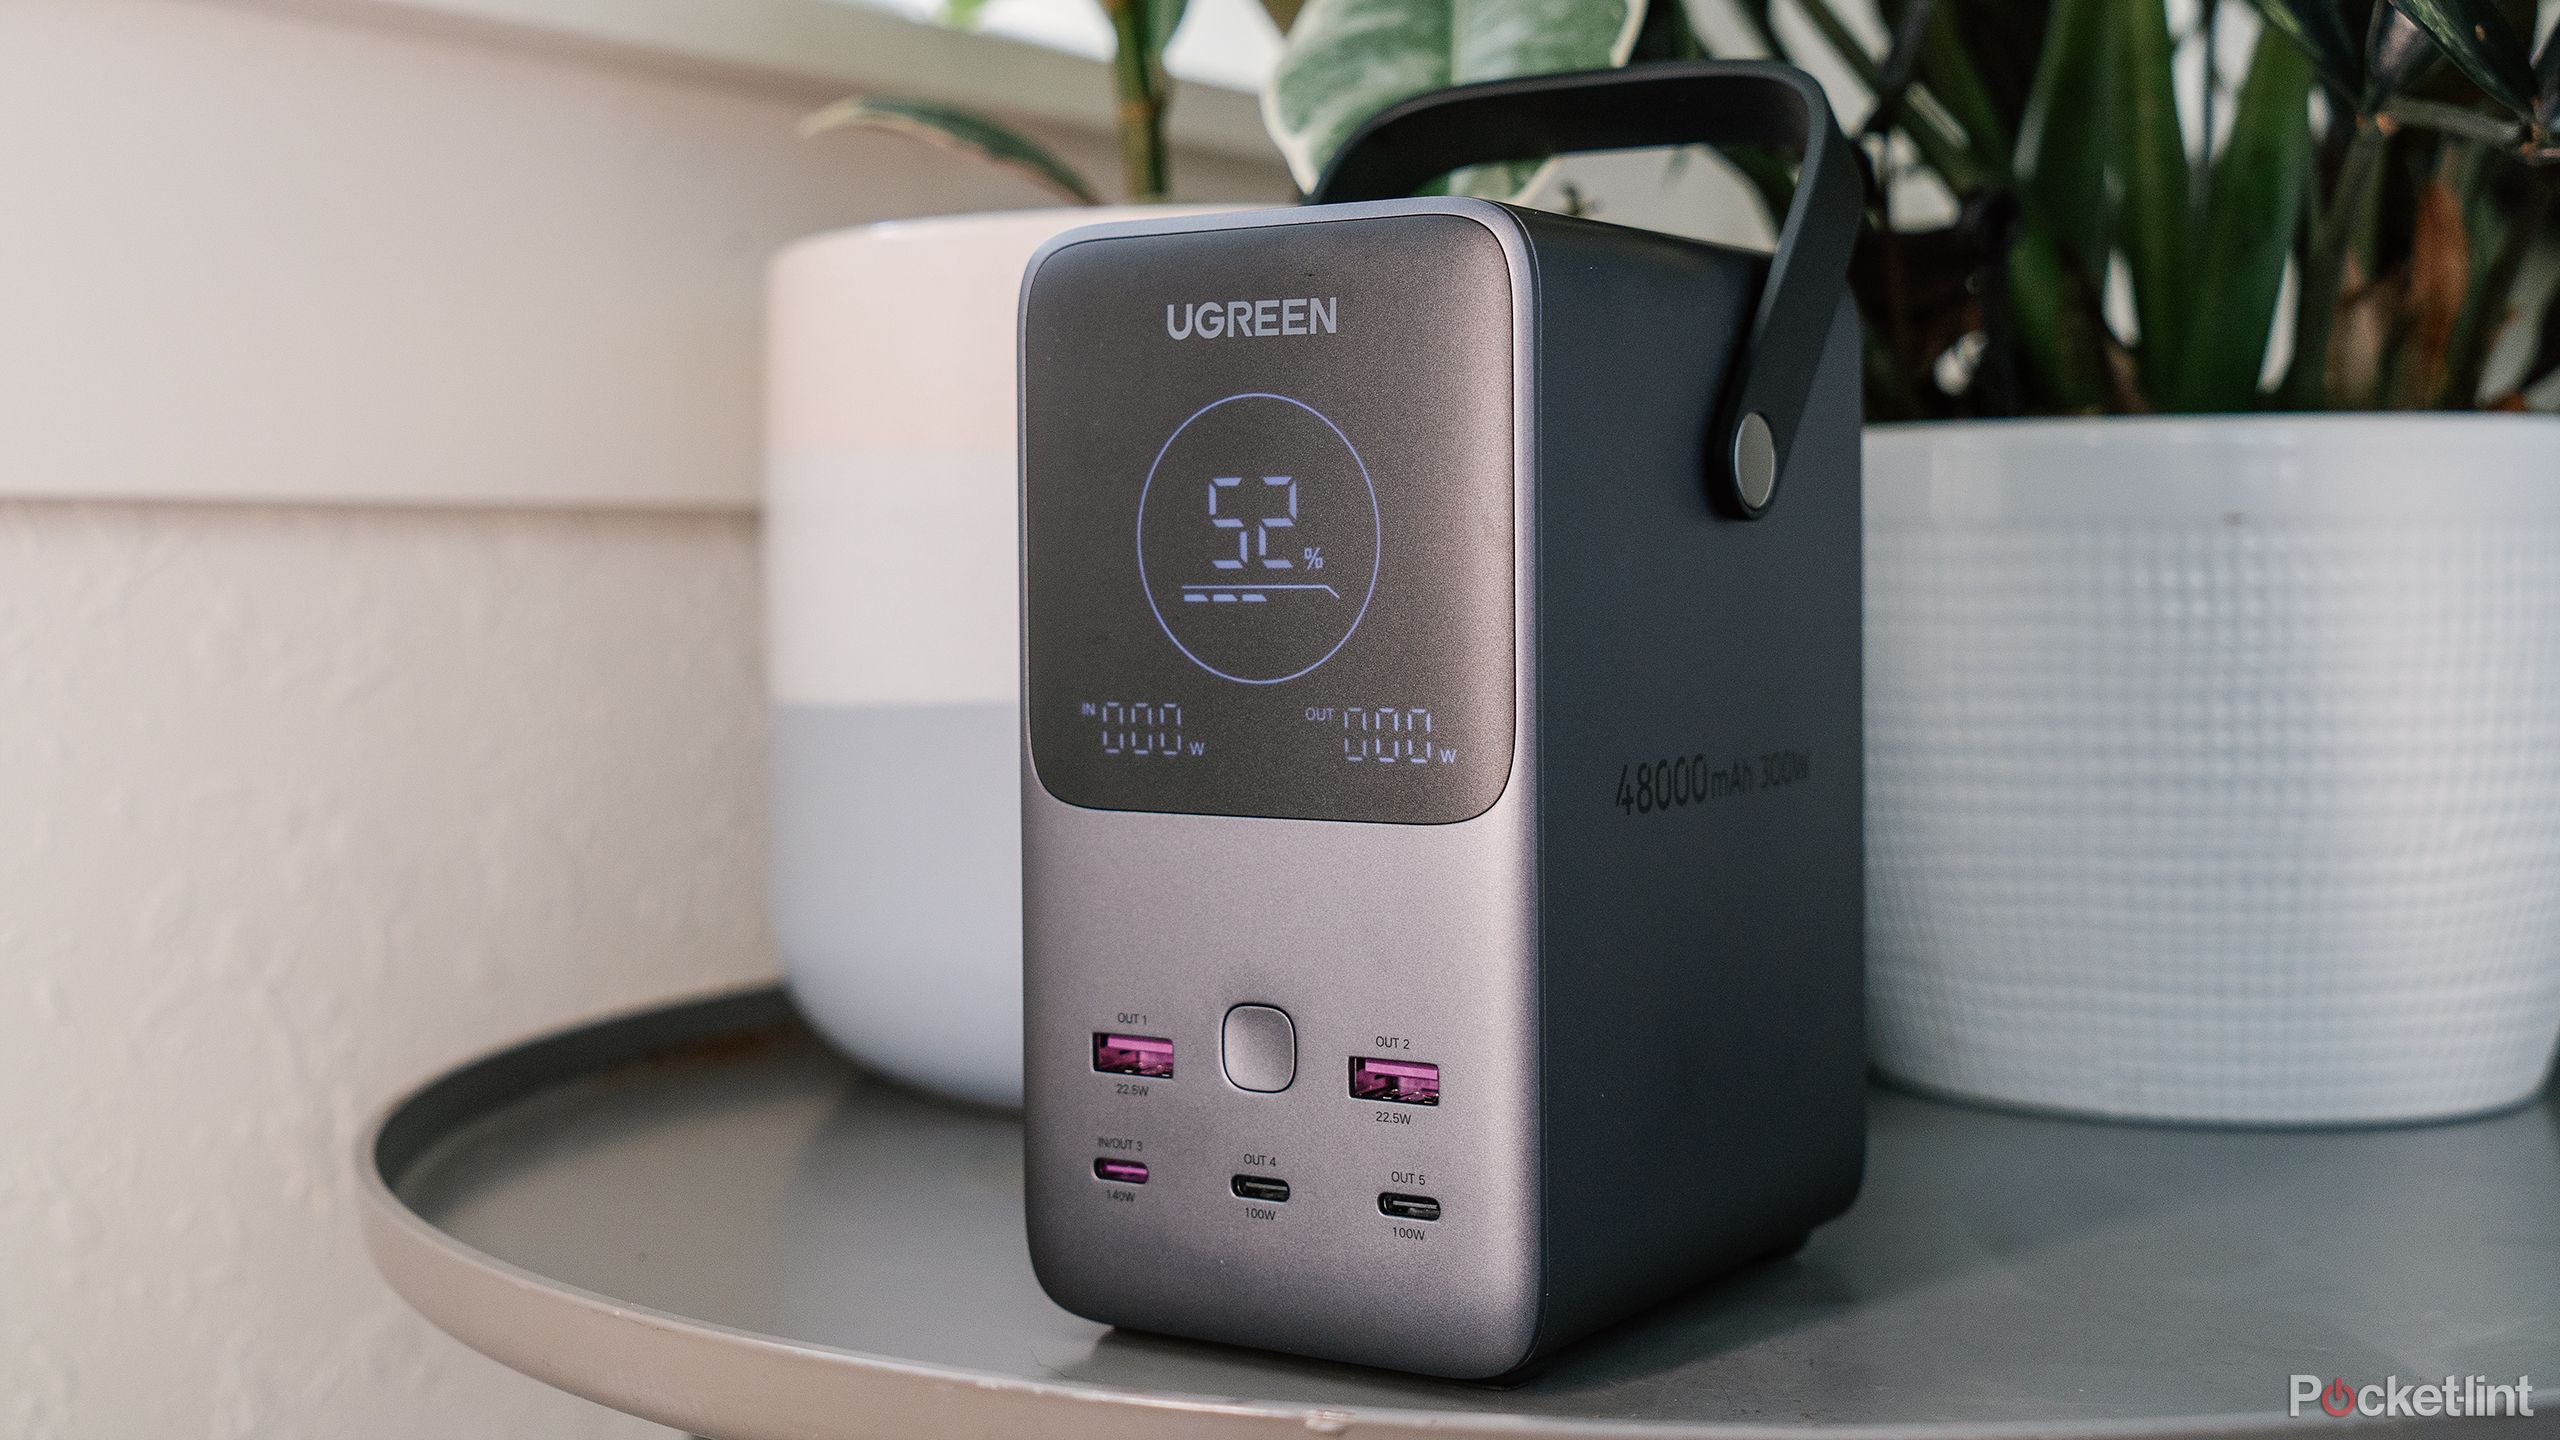 The Ugreen 300W 48000mAh Power Bank sits on a gray table in front of potted plants. 